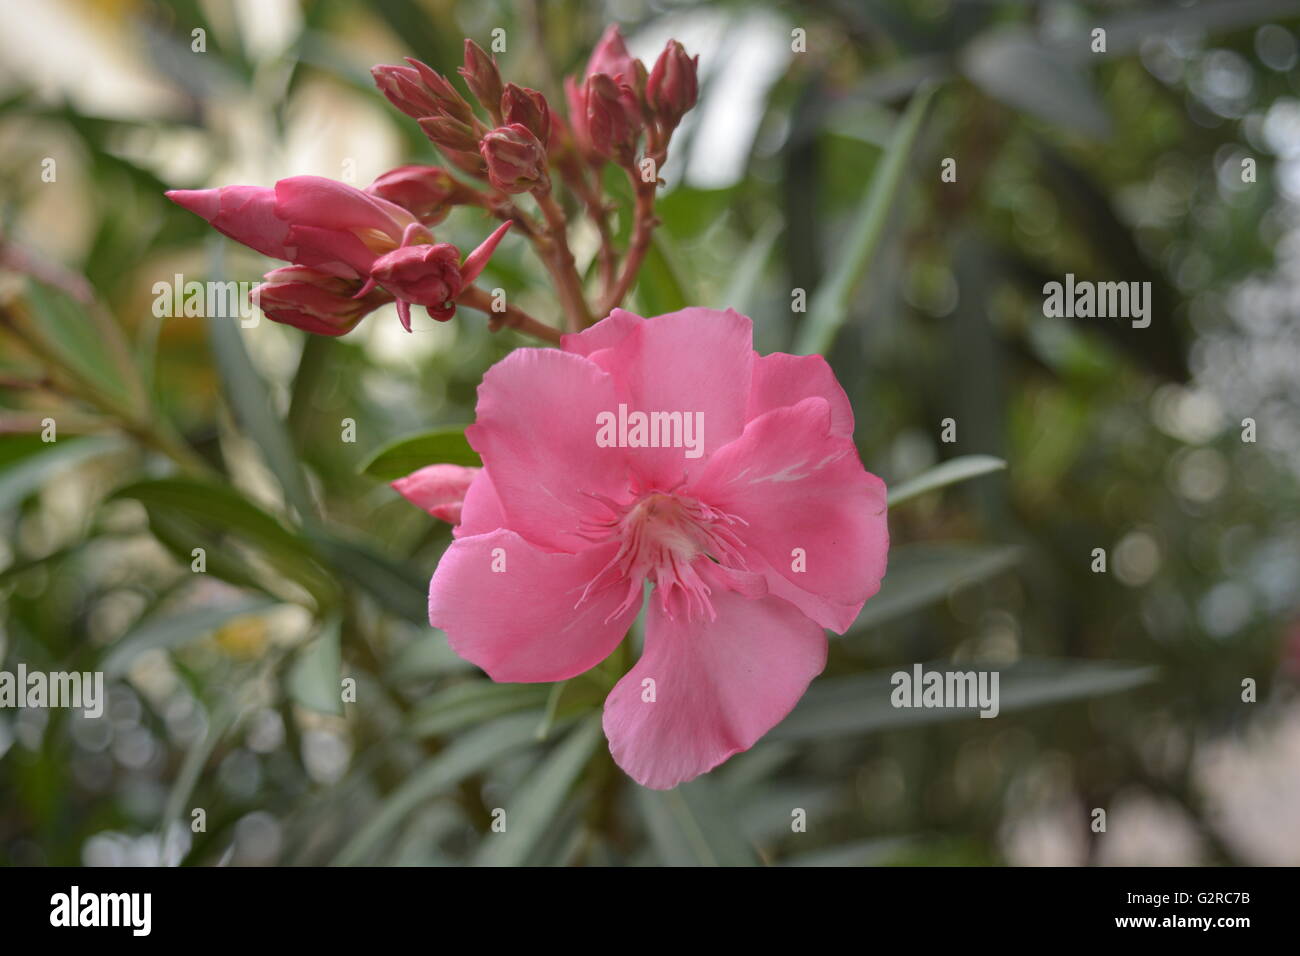 Nerium Oleander flower in the plant Stock Photo